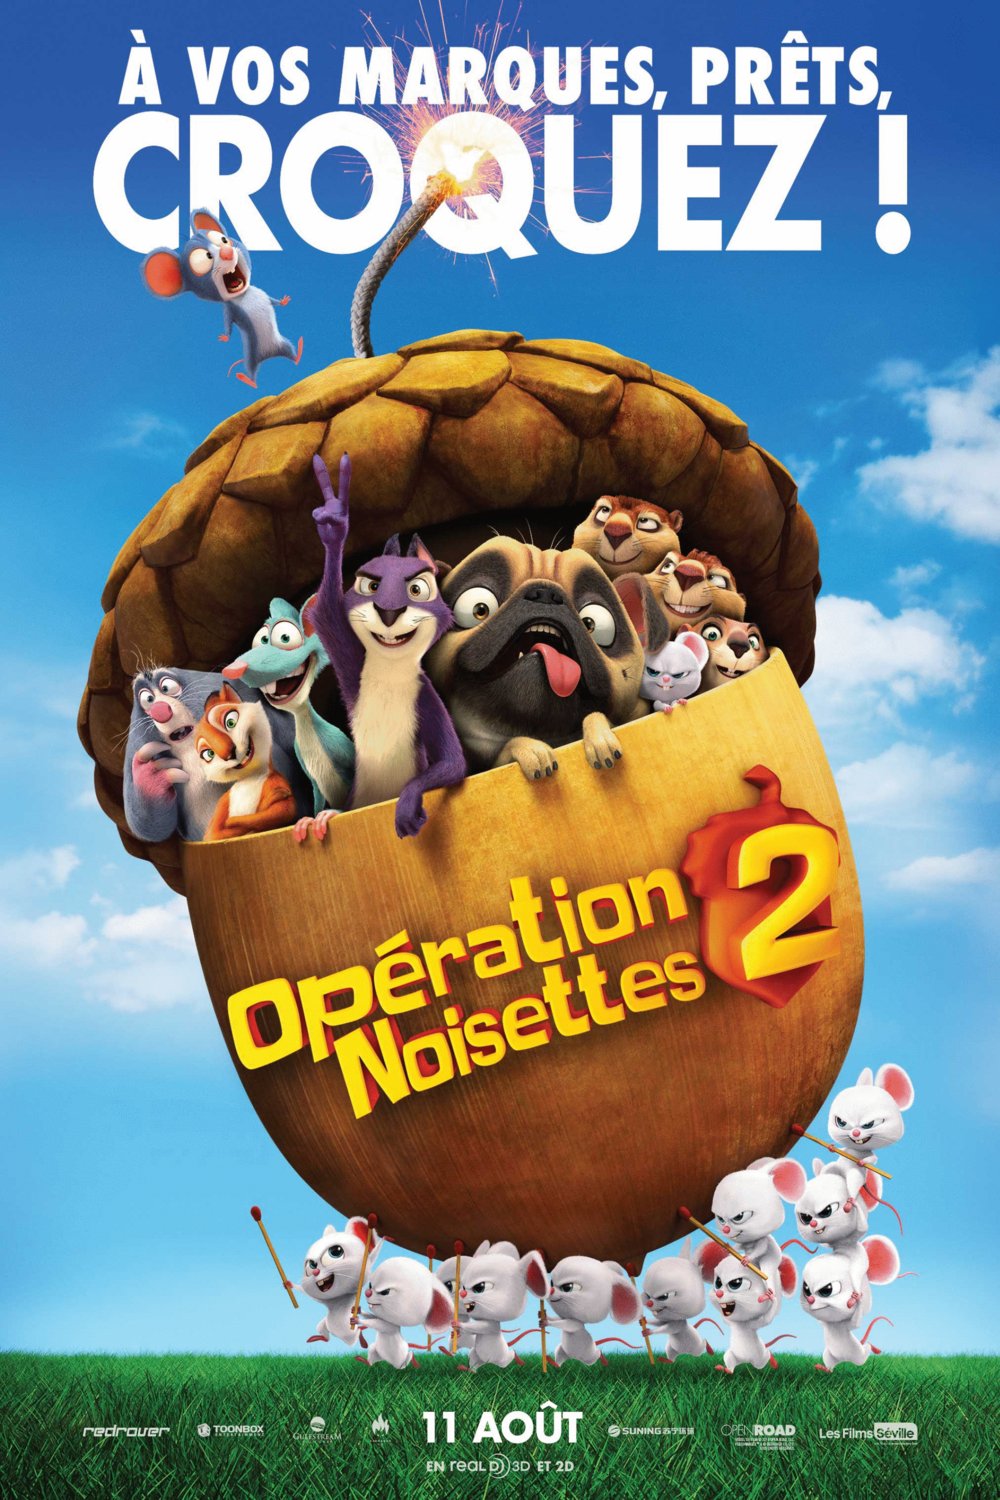 Poster of the movie Opération Noisettes 2